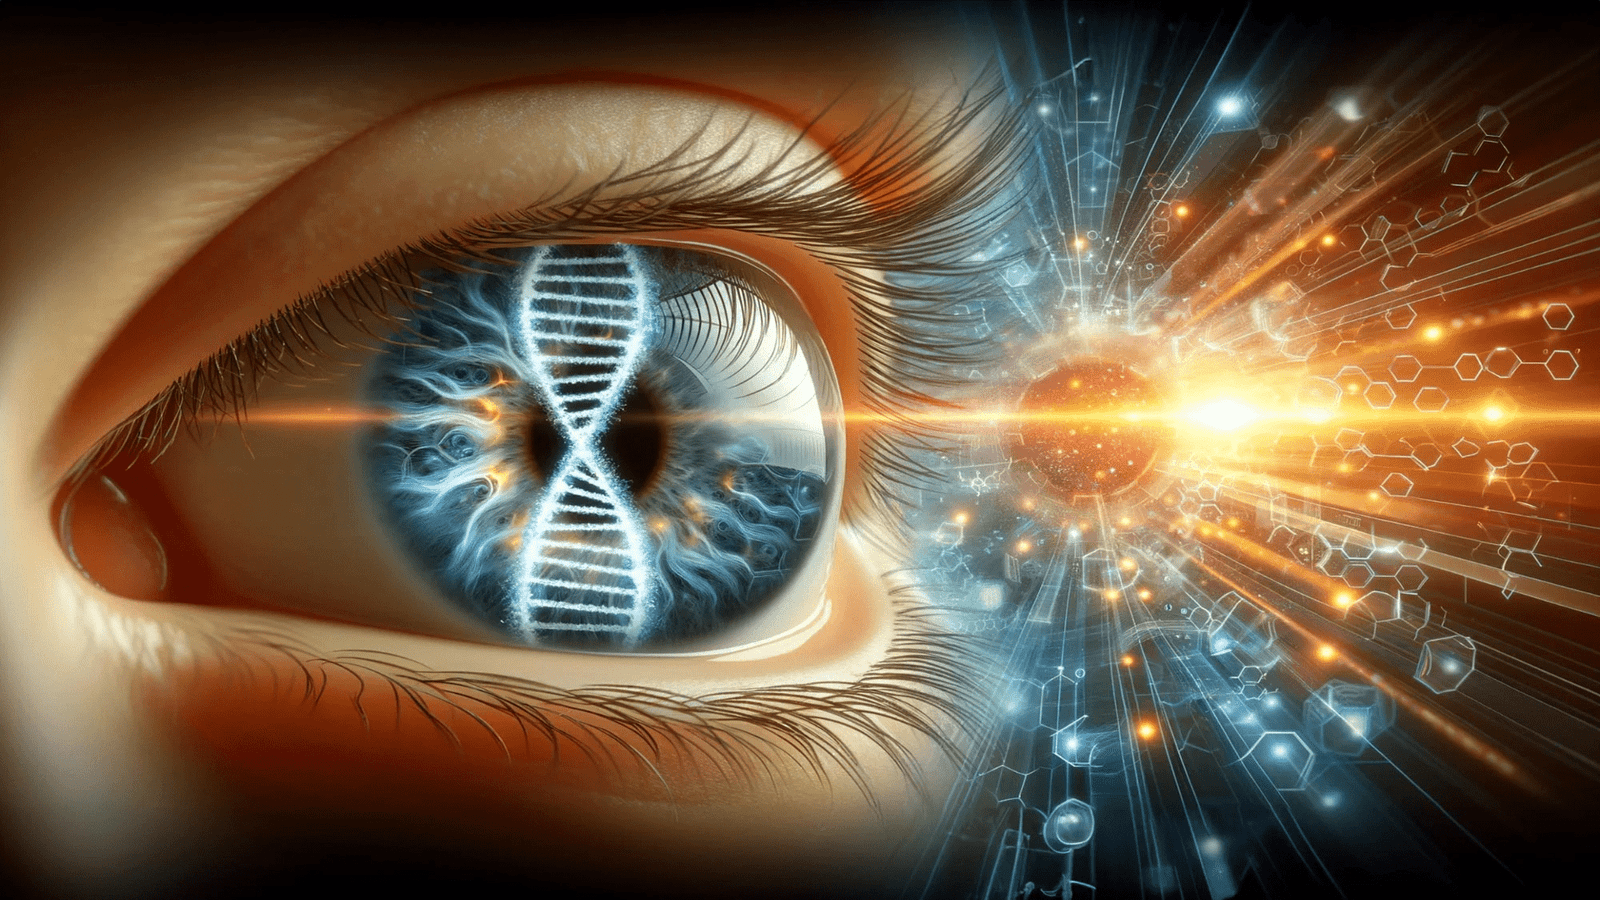 Breakthrough CRISPR treatment restores vision in patients with rare blindness